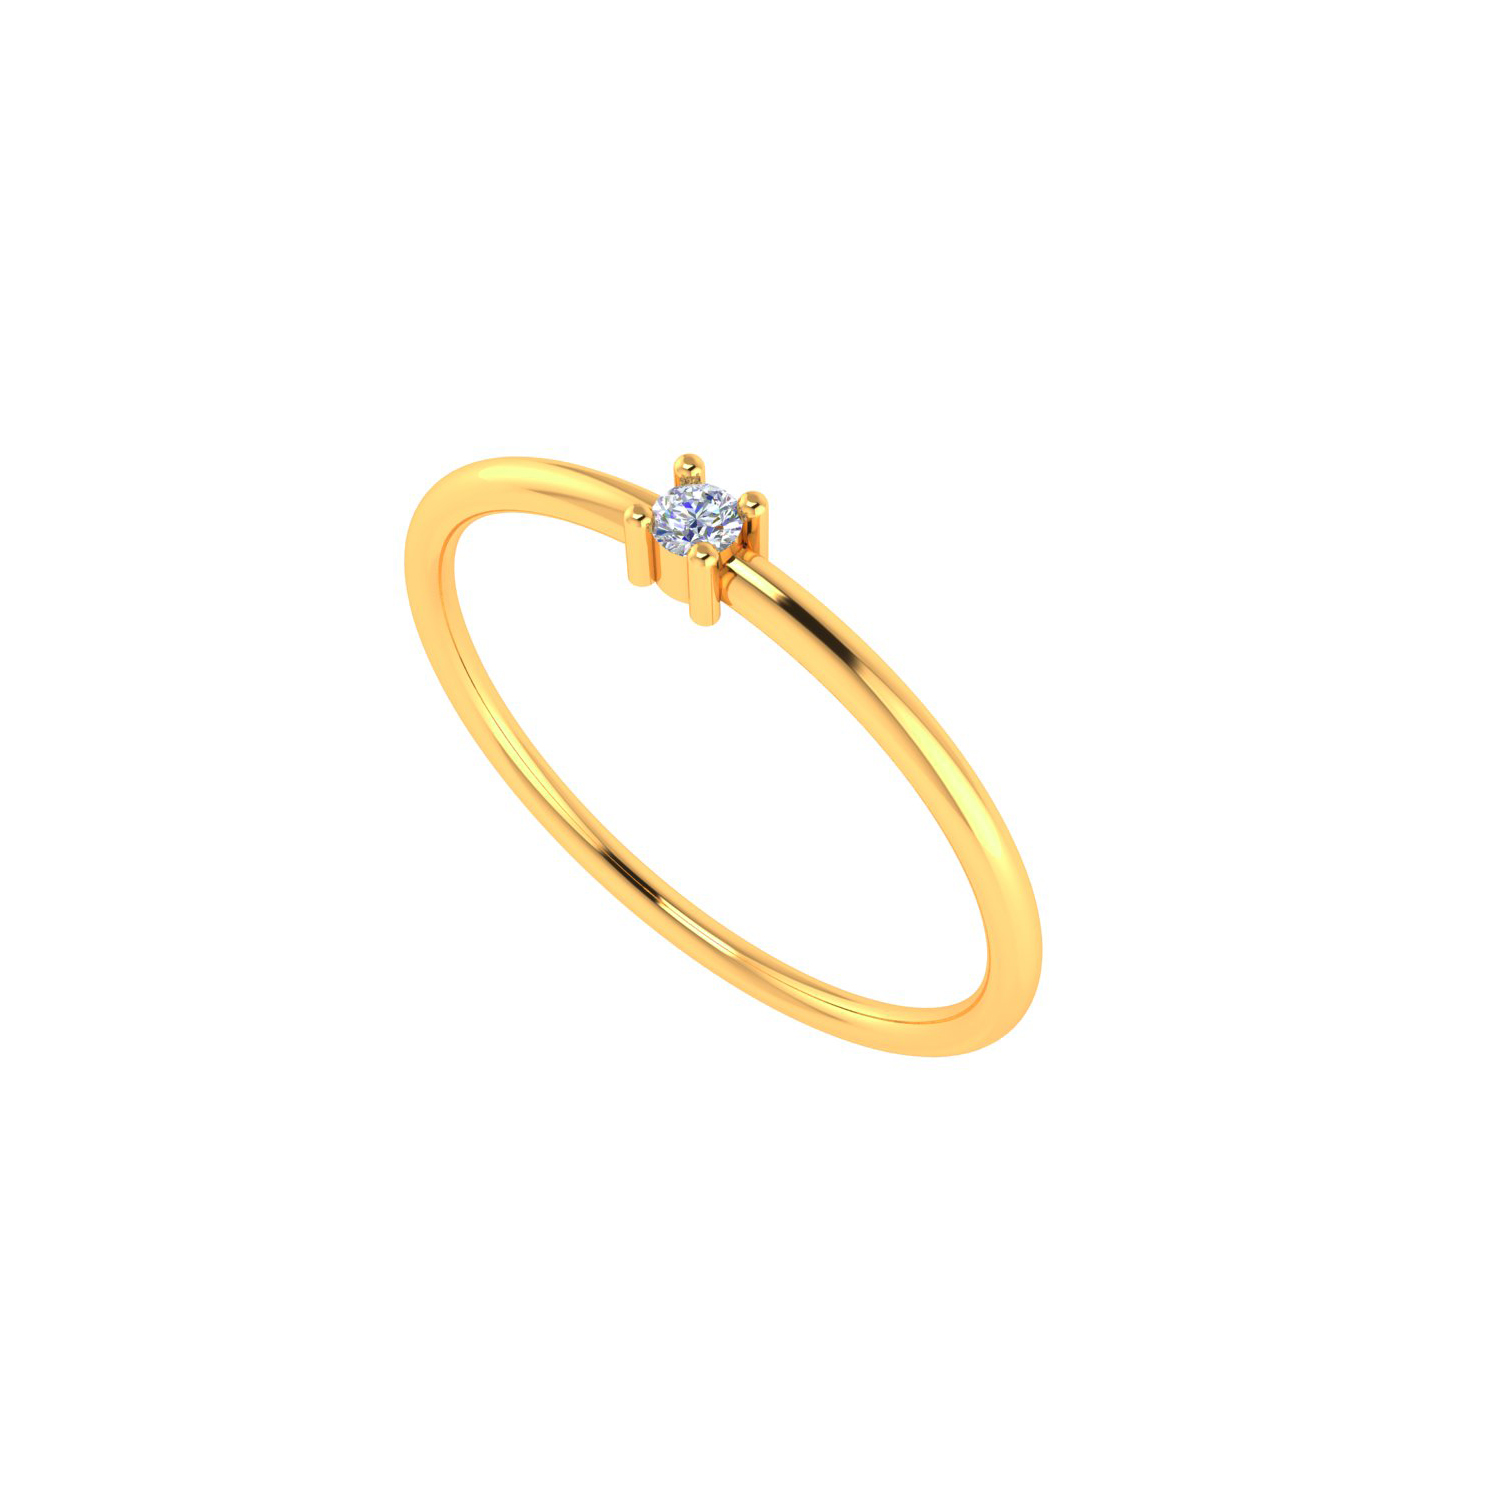 Solid Gold Solitaire Diamond Wedding Ring